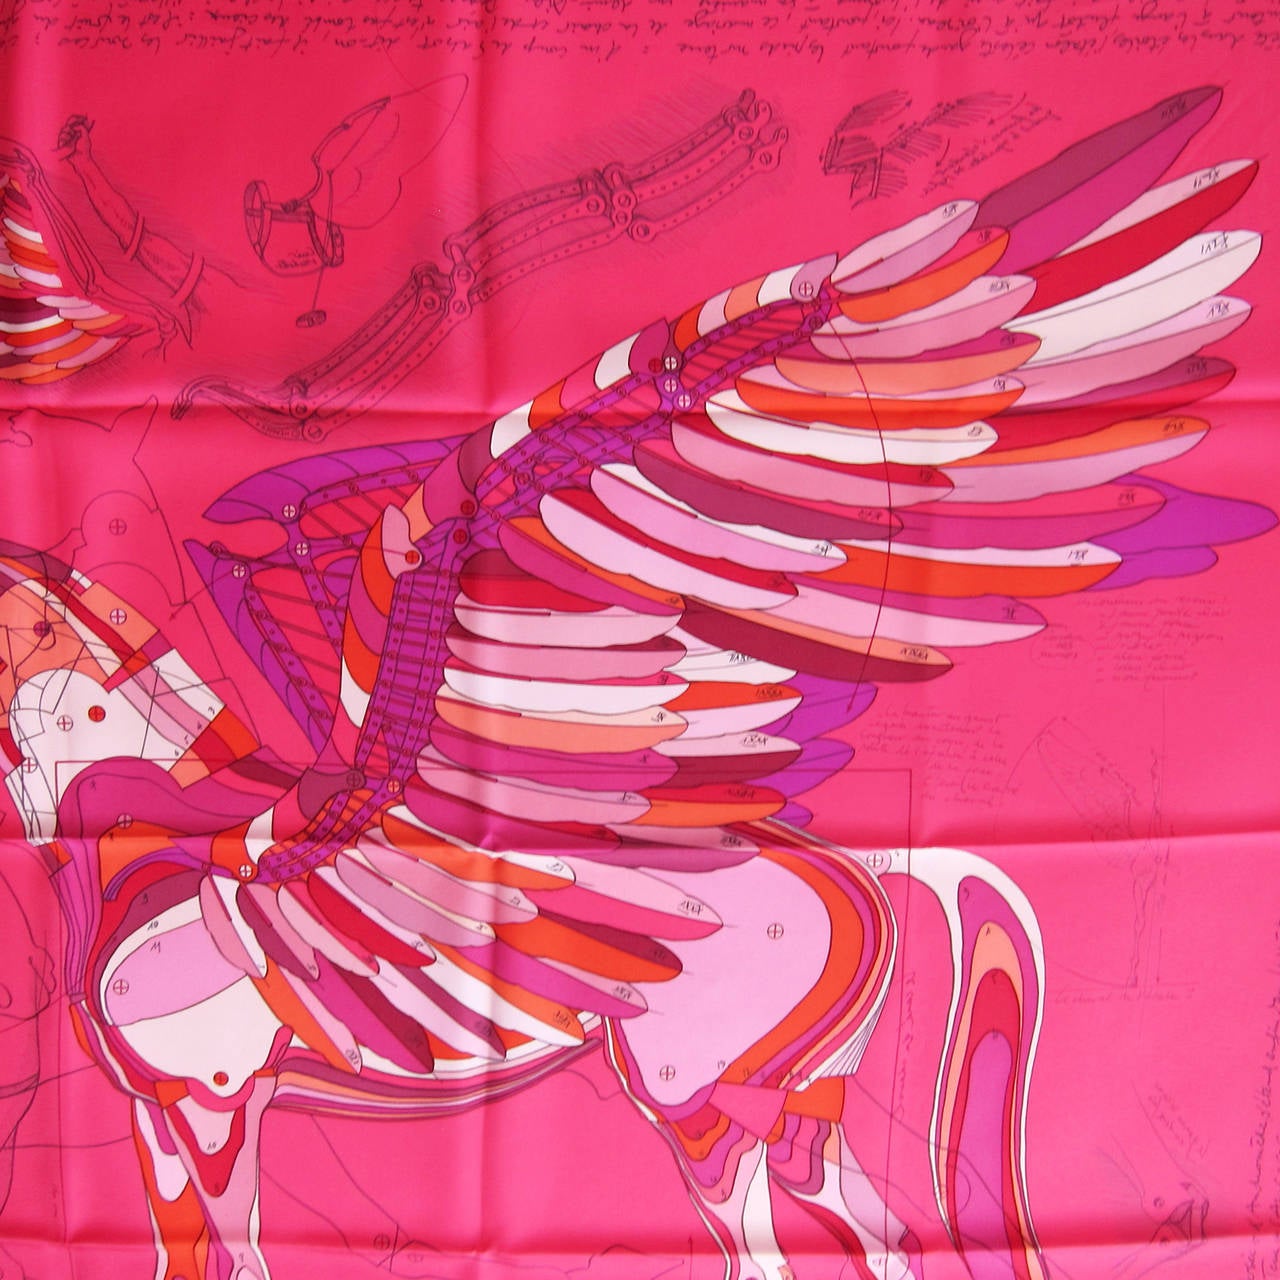 Hermes Le Pegase d'Hermes Silk Scarf Carre 90cm Gorgeous

Designed by Christian Renonciat
Famous detailed anatomical drawing of a Pegasus horse
Hermes silk twill scarf, hand rolled, 36